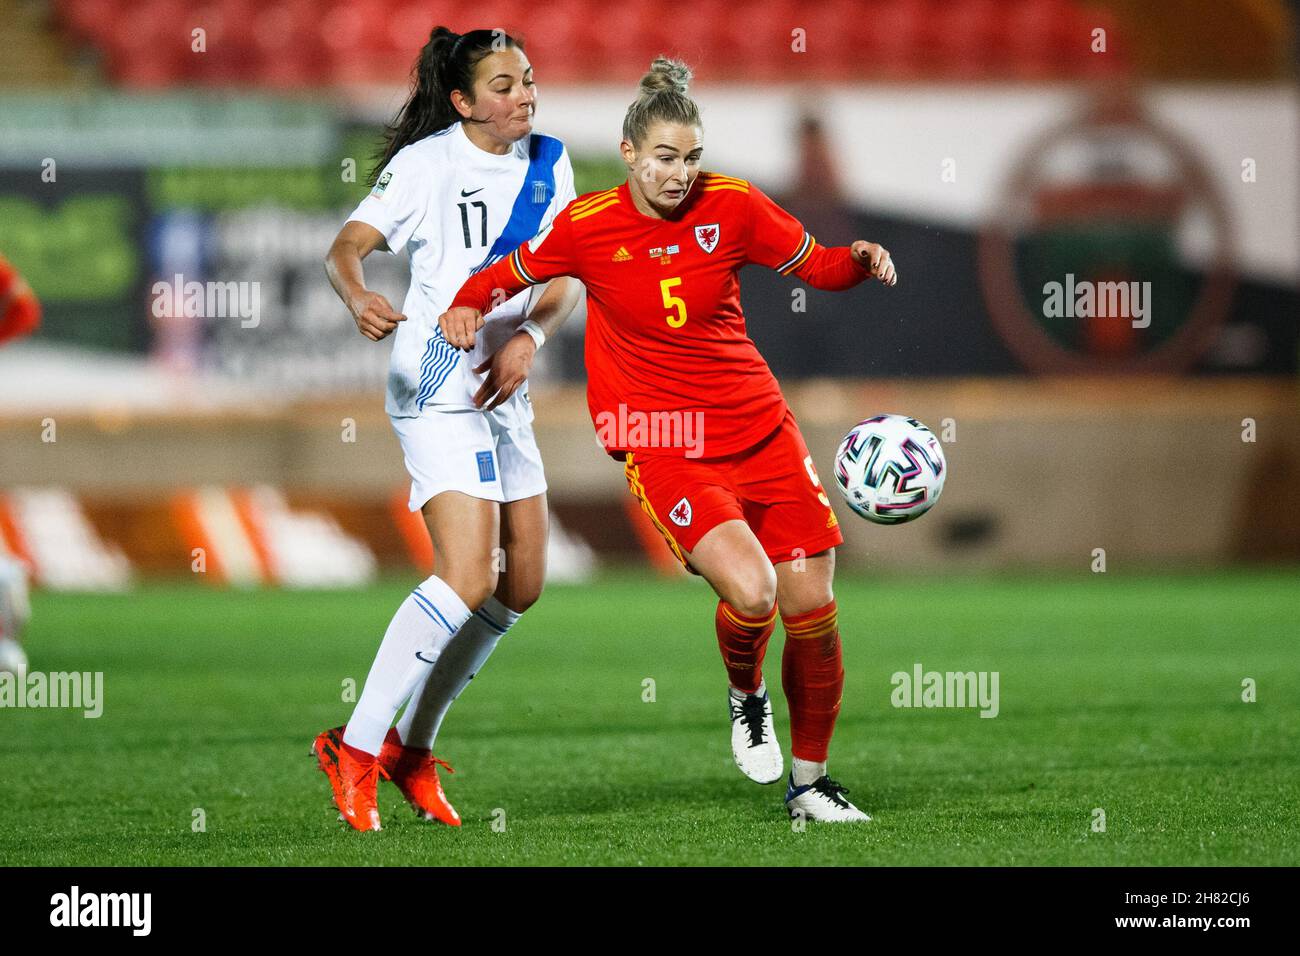 Llanelli, UK. 26 November, 2021. Rhiannon Roberts of Wales under pressure from Athanasia Moraitou of Greece during the Wales v Greece Women's World Cup Qualification match. Credit: Gruffydd Thomas/Alamy Stock Photo